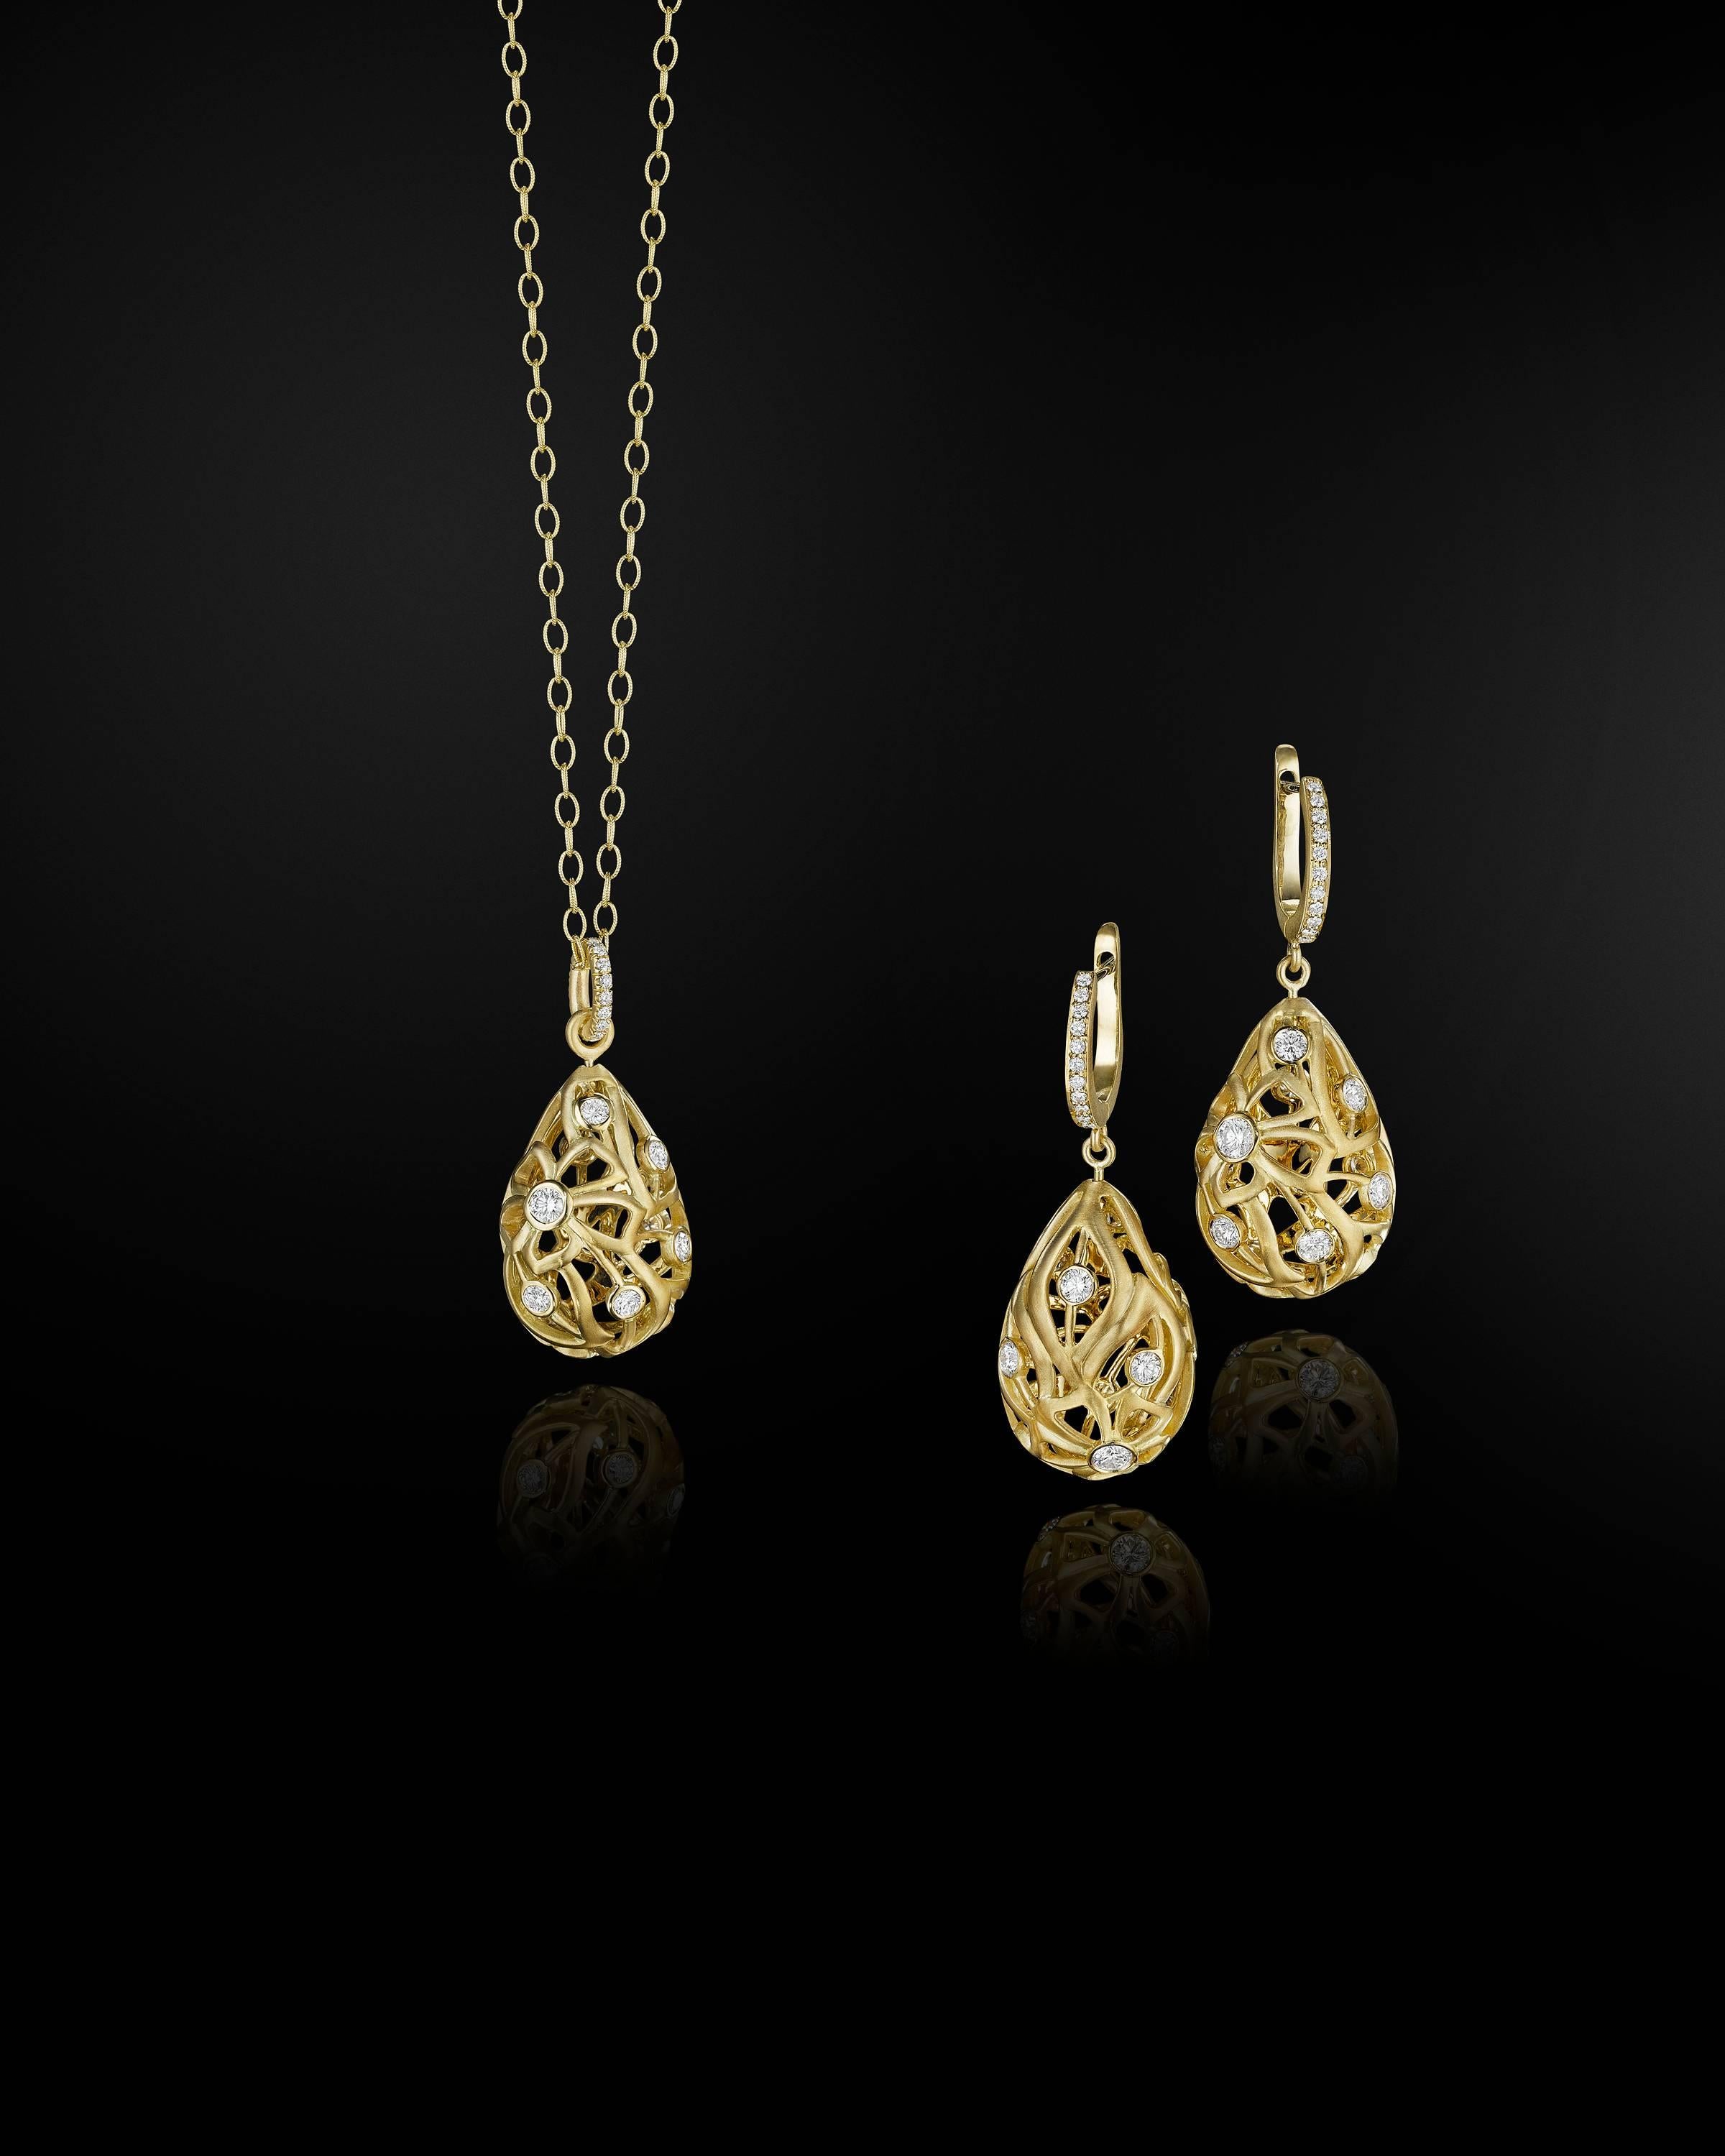 This romantic, floral pendant necklace made in 18k gold features .58 carats of dazzling GH-VS round diamonds set in a sultry three dimensional pear shape.  The swirling floral motif pendant measures 1 inch long and features diamonds on both sides. 